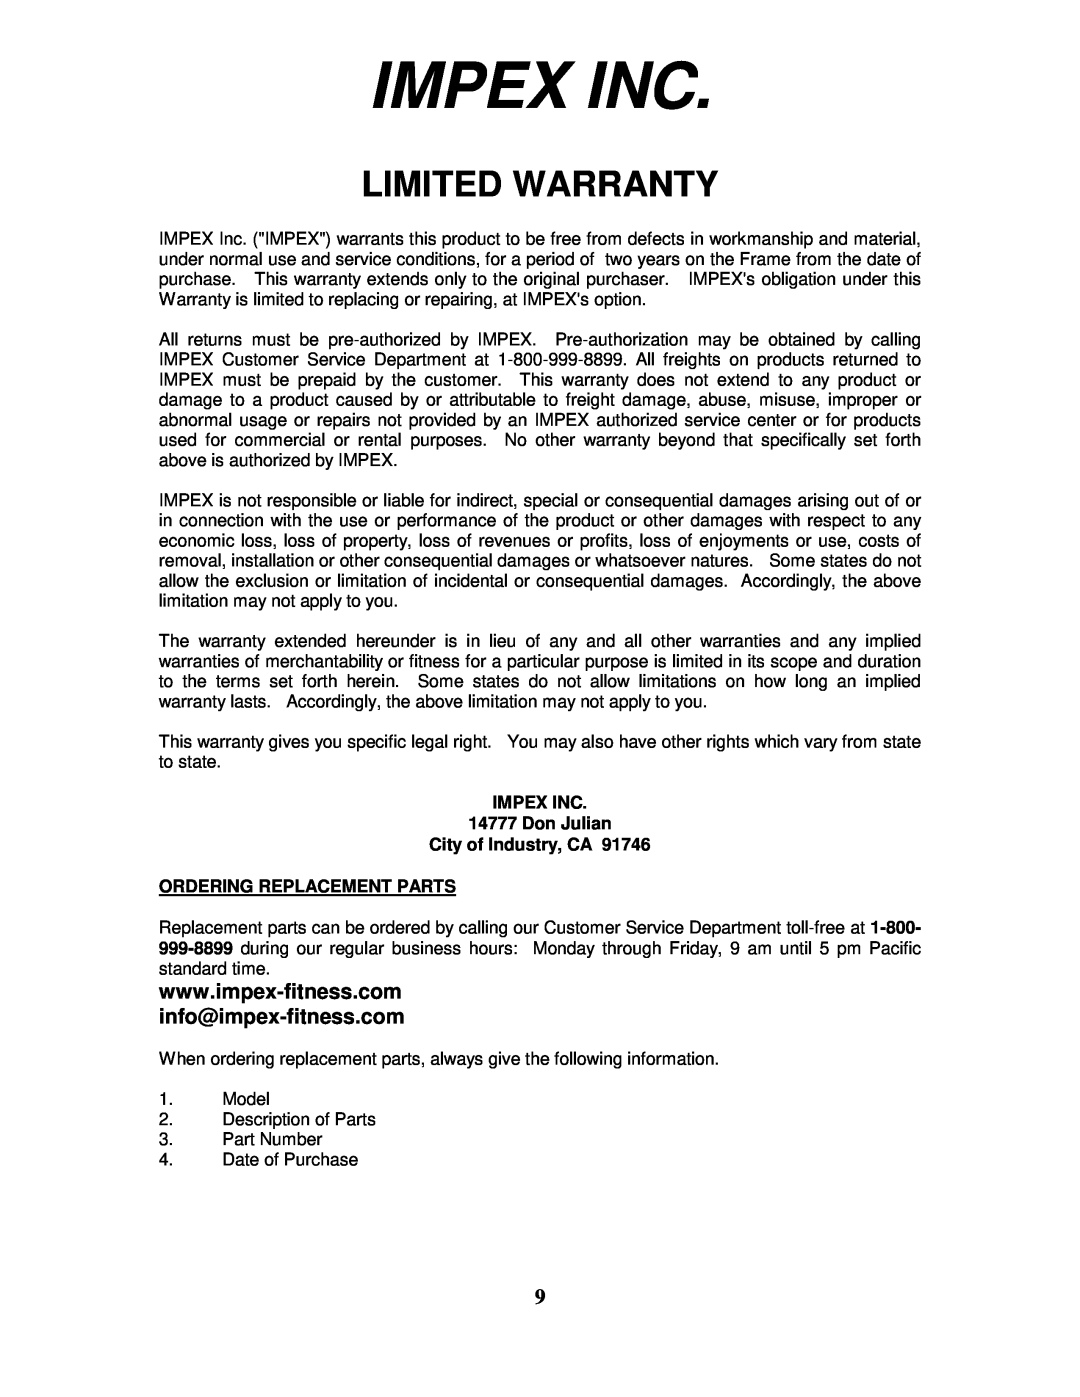 Impex SB 210 Impex Inc, Limited Warranty, IMPEX INC 14777 Don Julian City of Industry, CA, Ordering Replacement Parts 